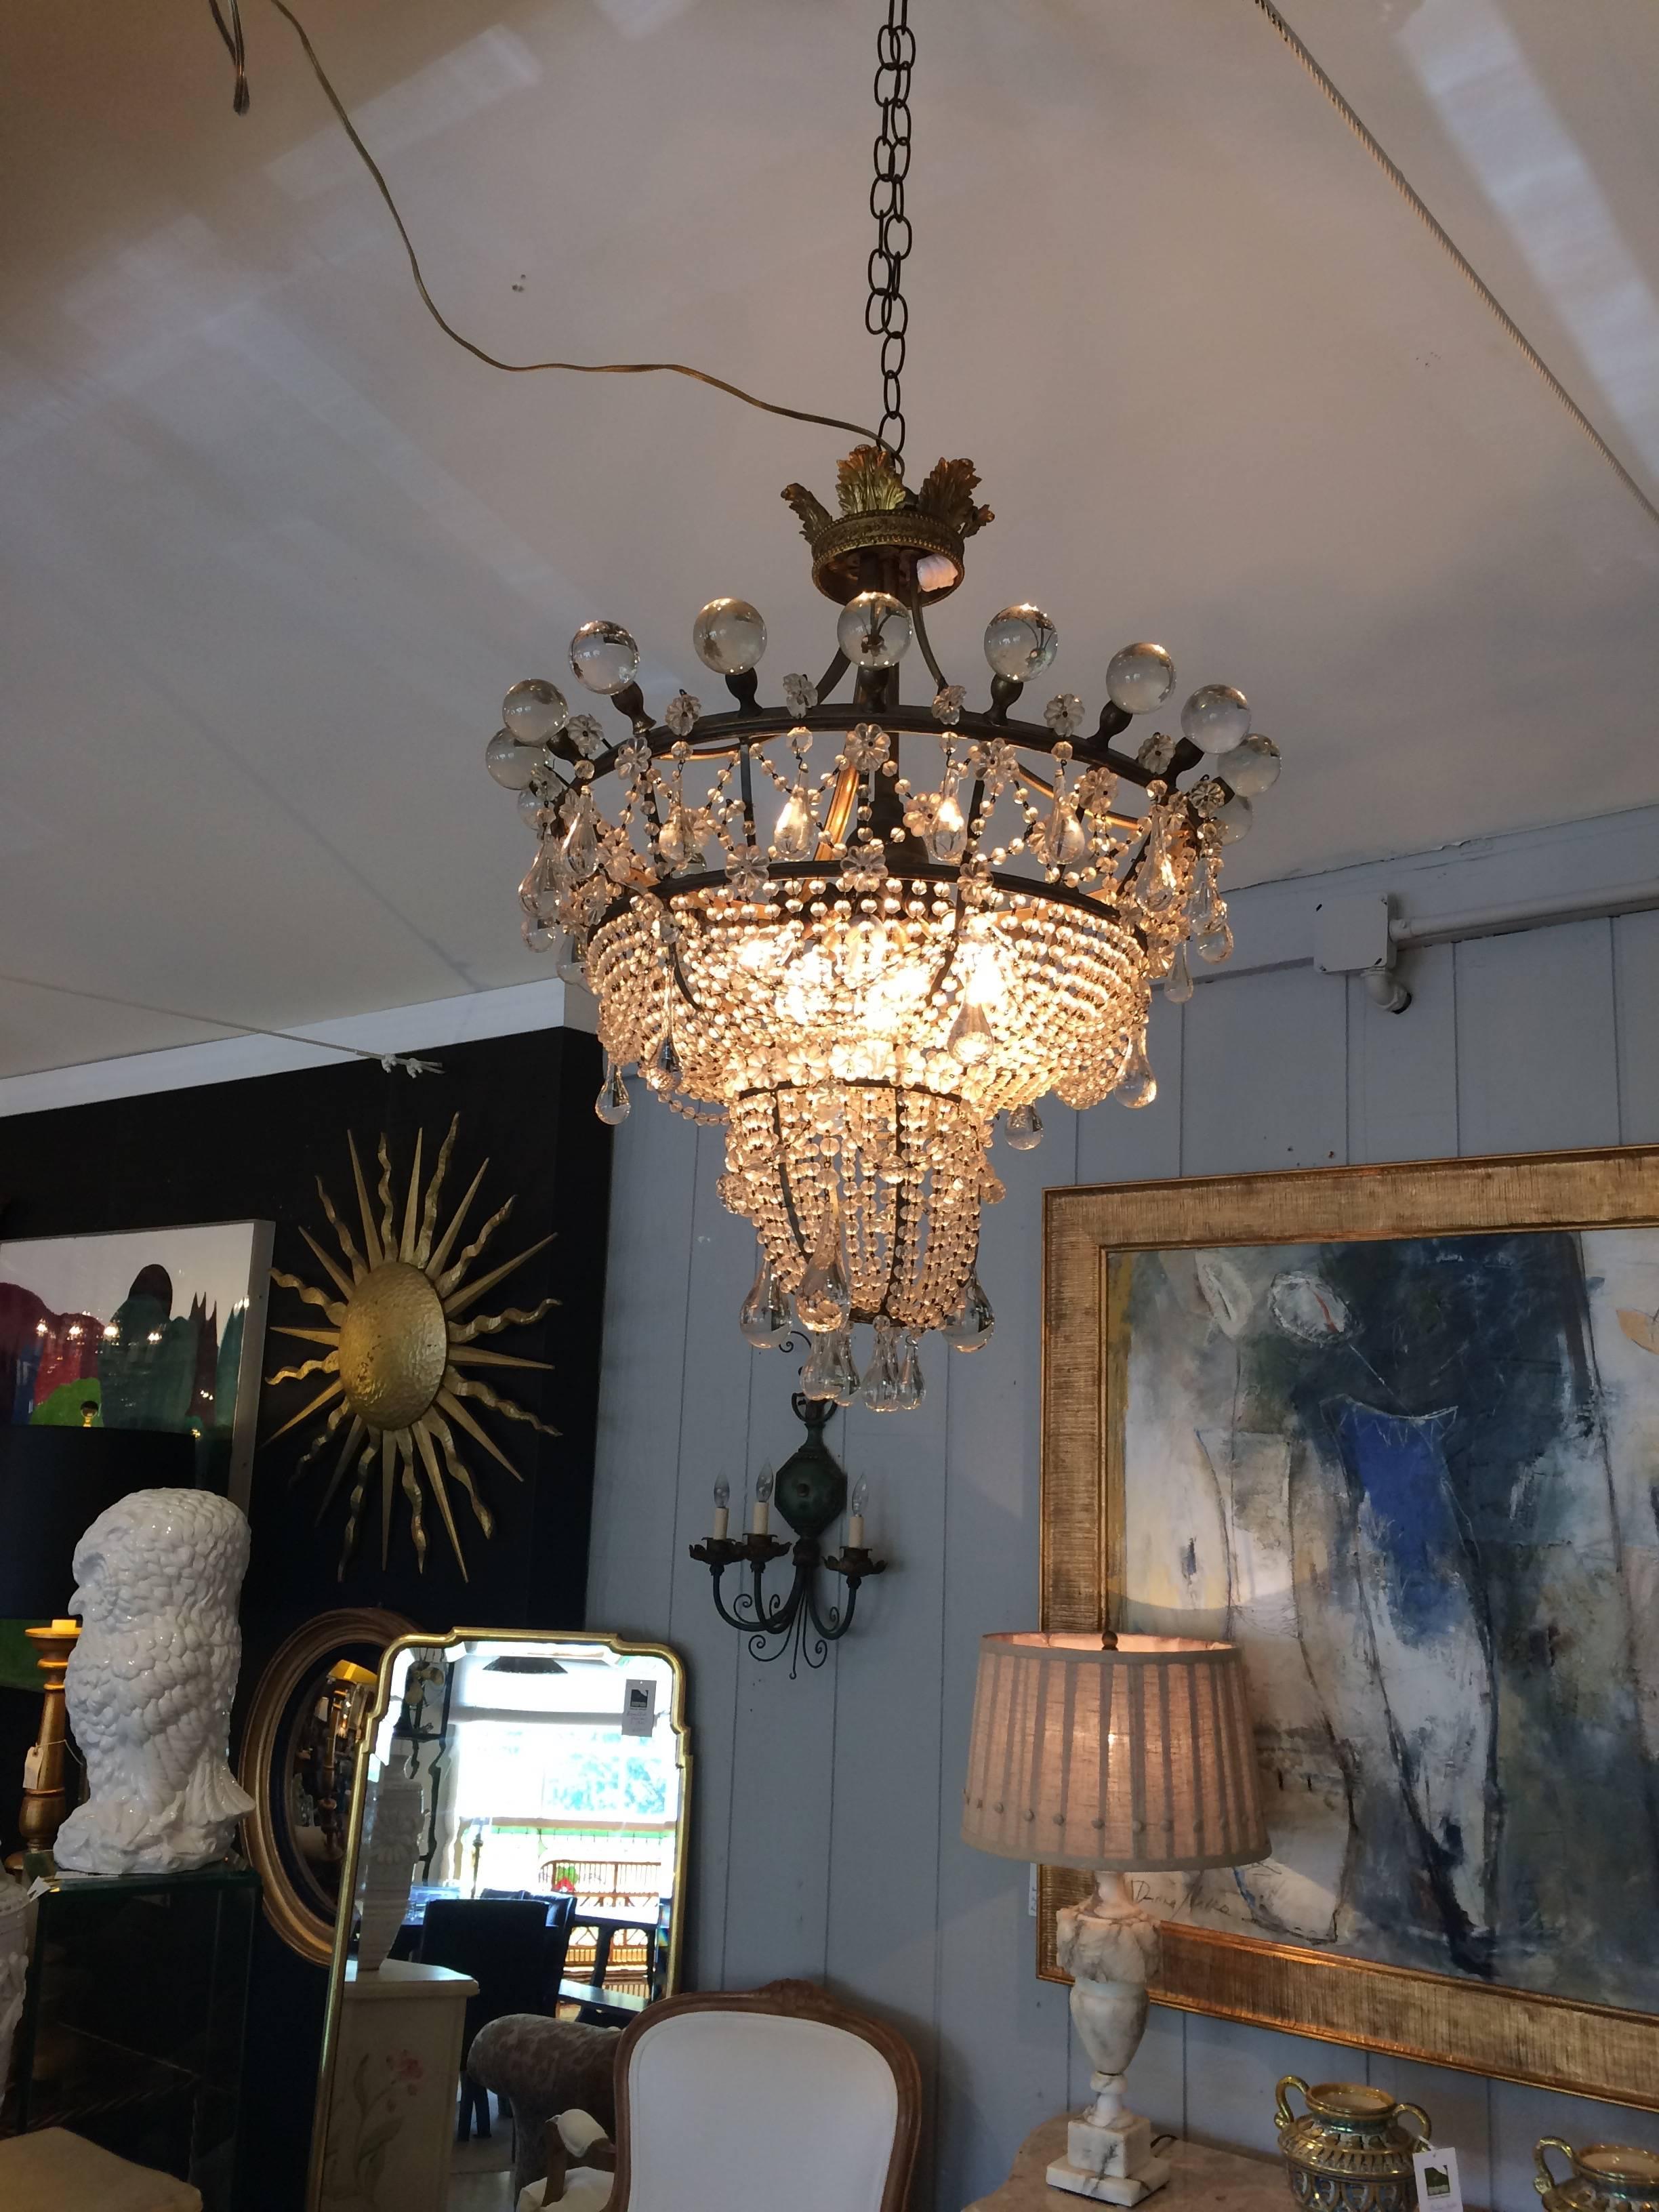 Unbelievably romantic and rare chandelier having amazing large crystal balls around the circular top with graduated circular tiers bejeweled with small balls and large tear shaped crystals. A regal brass crown tops it off and there are seven